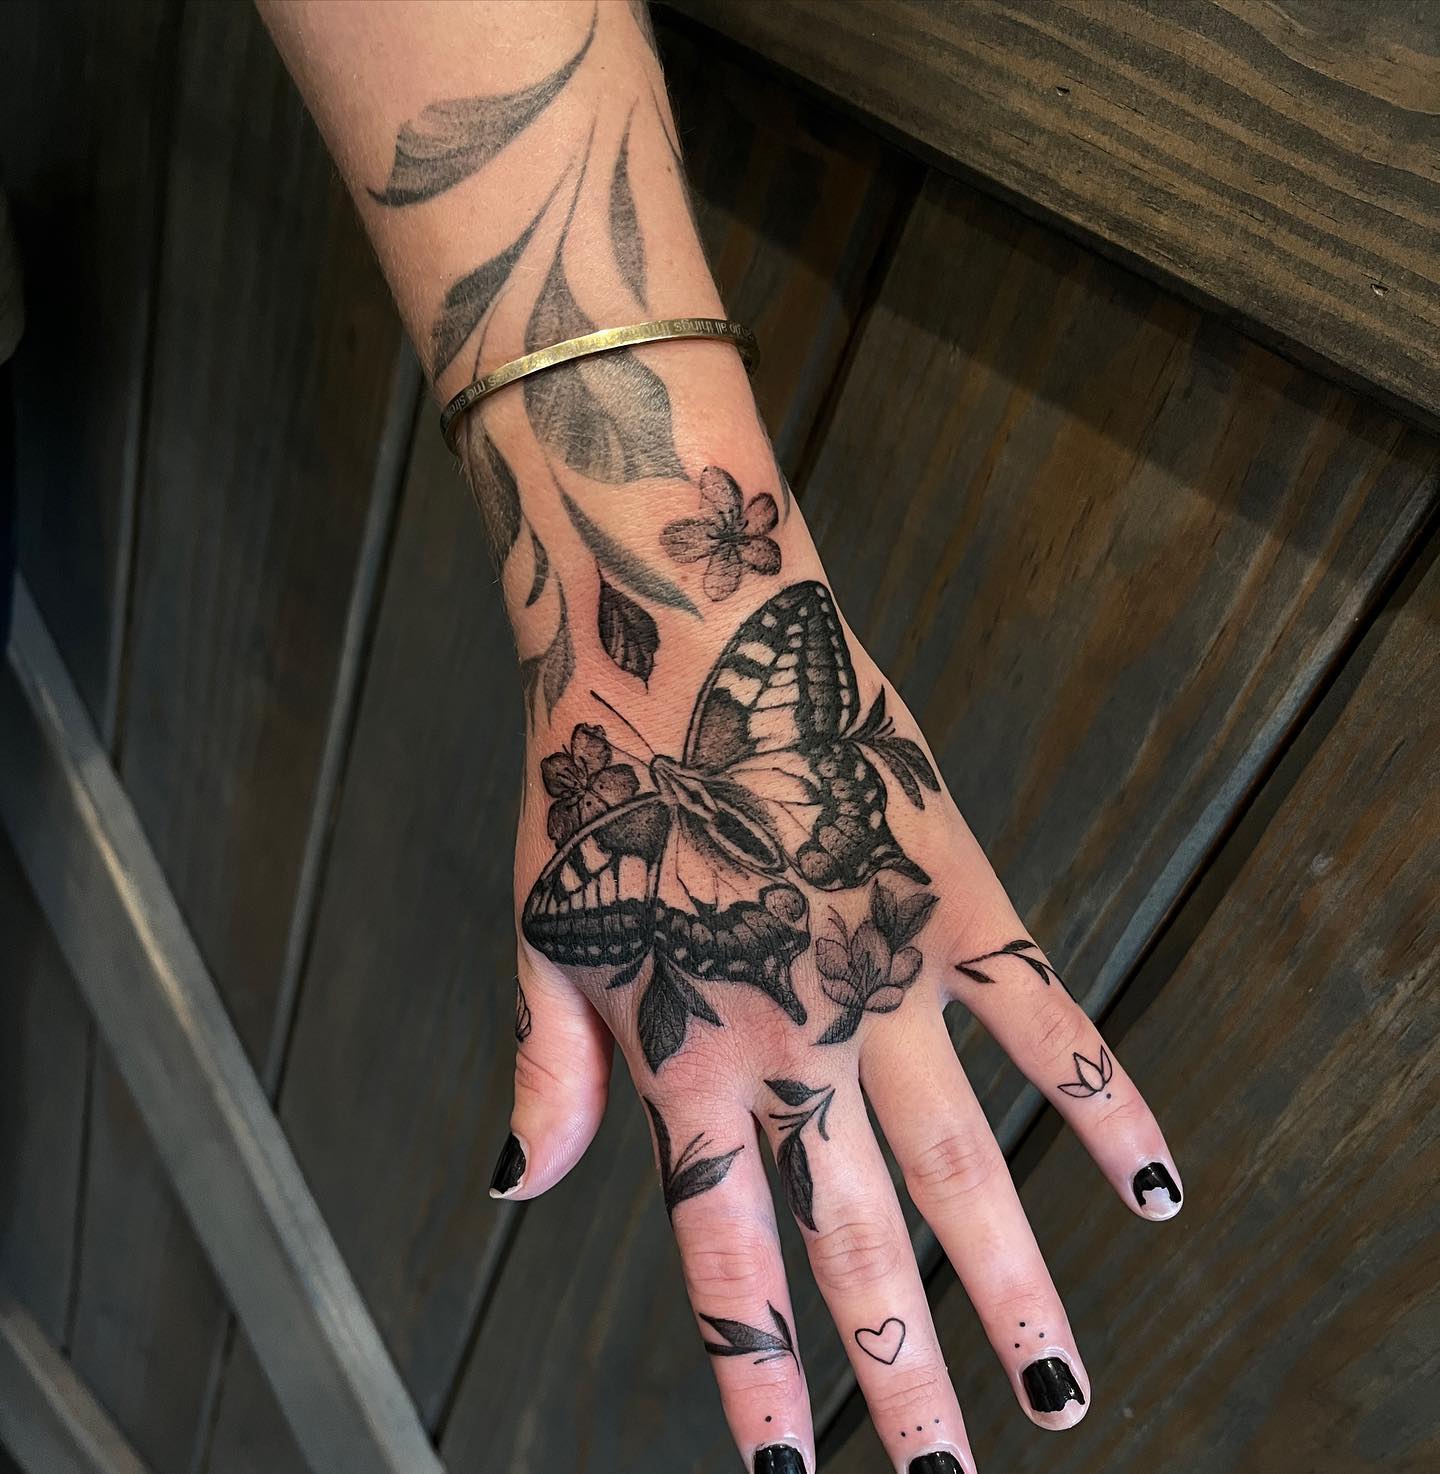 butterfly tattoo on hand for girl